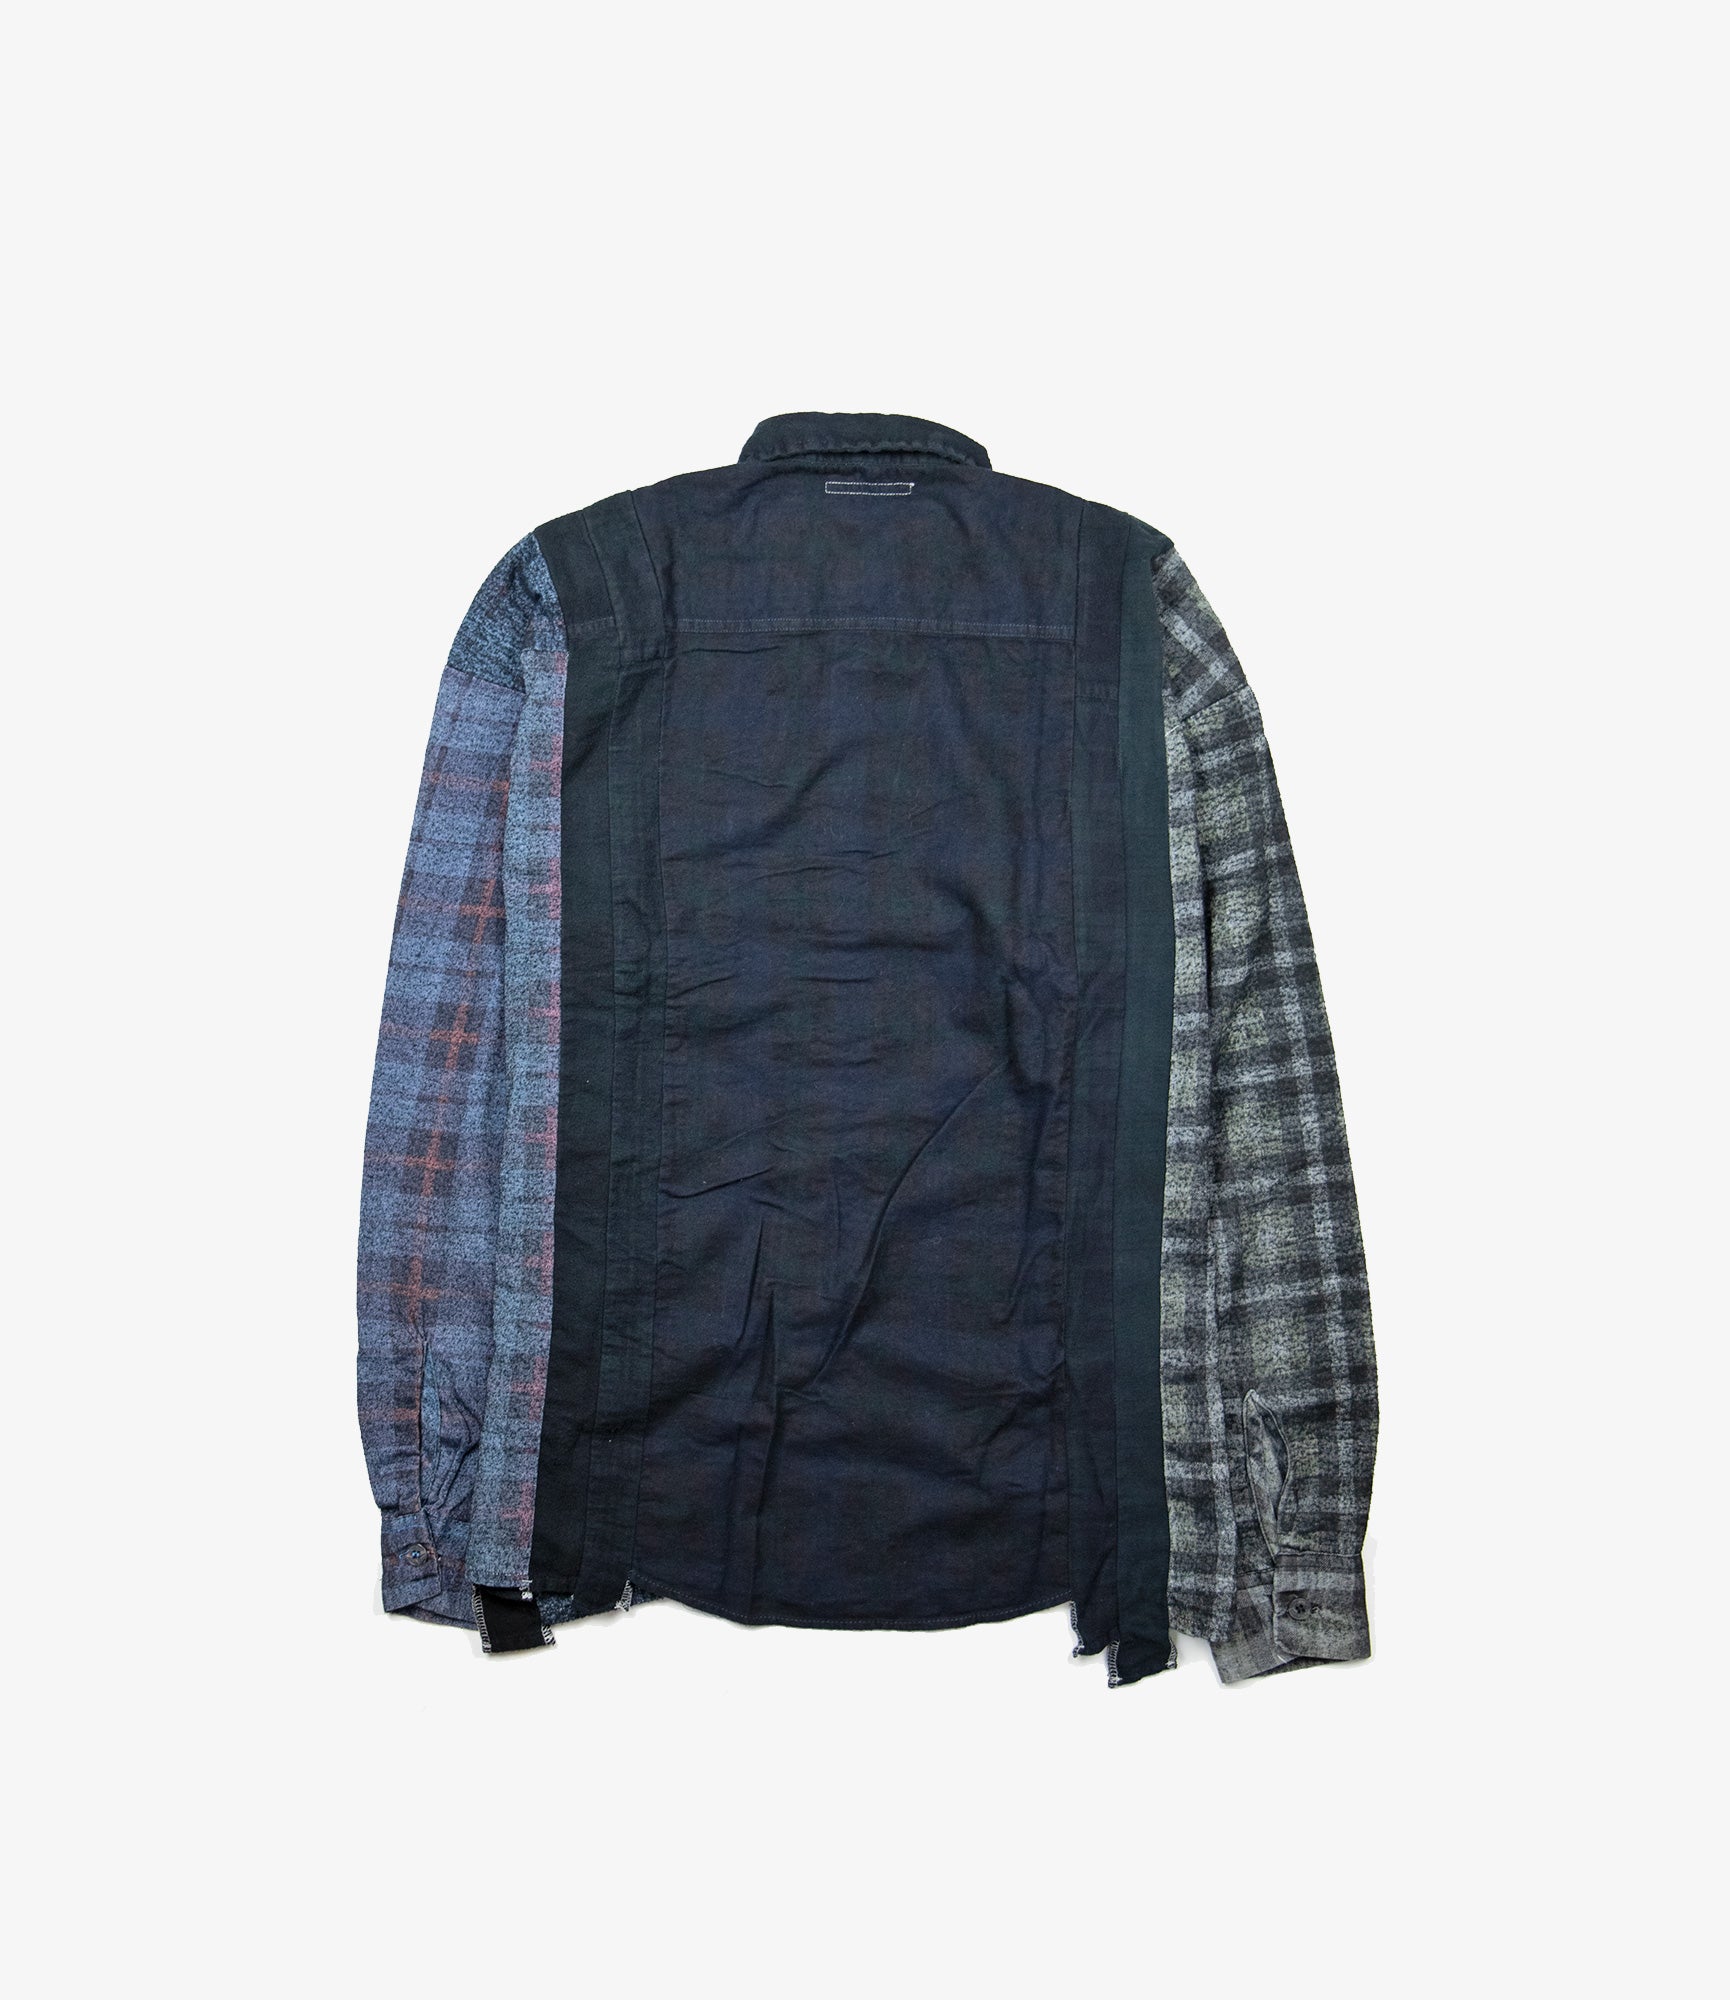 Rebuild by Needles Flannel Shirt - 7 Cuts Wide Shirt / Over Dye - Black